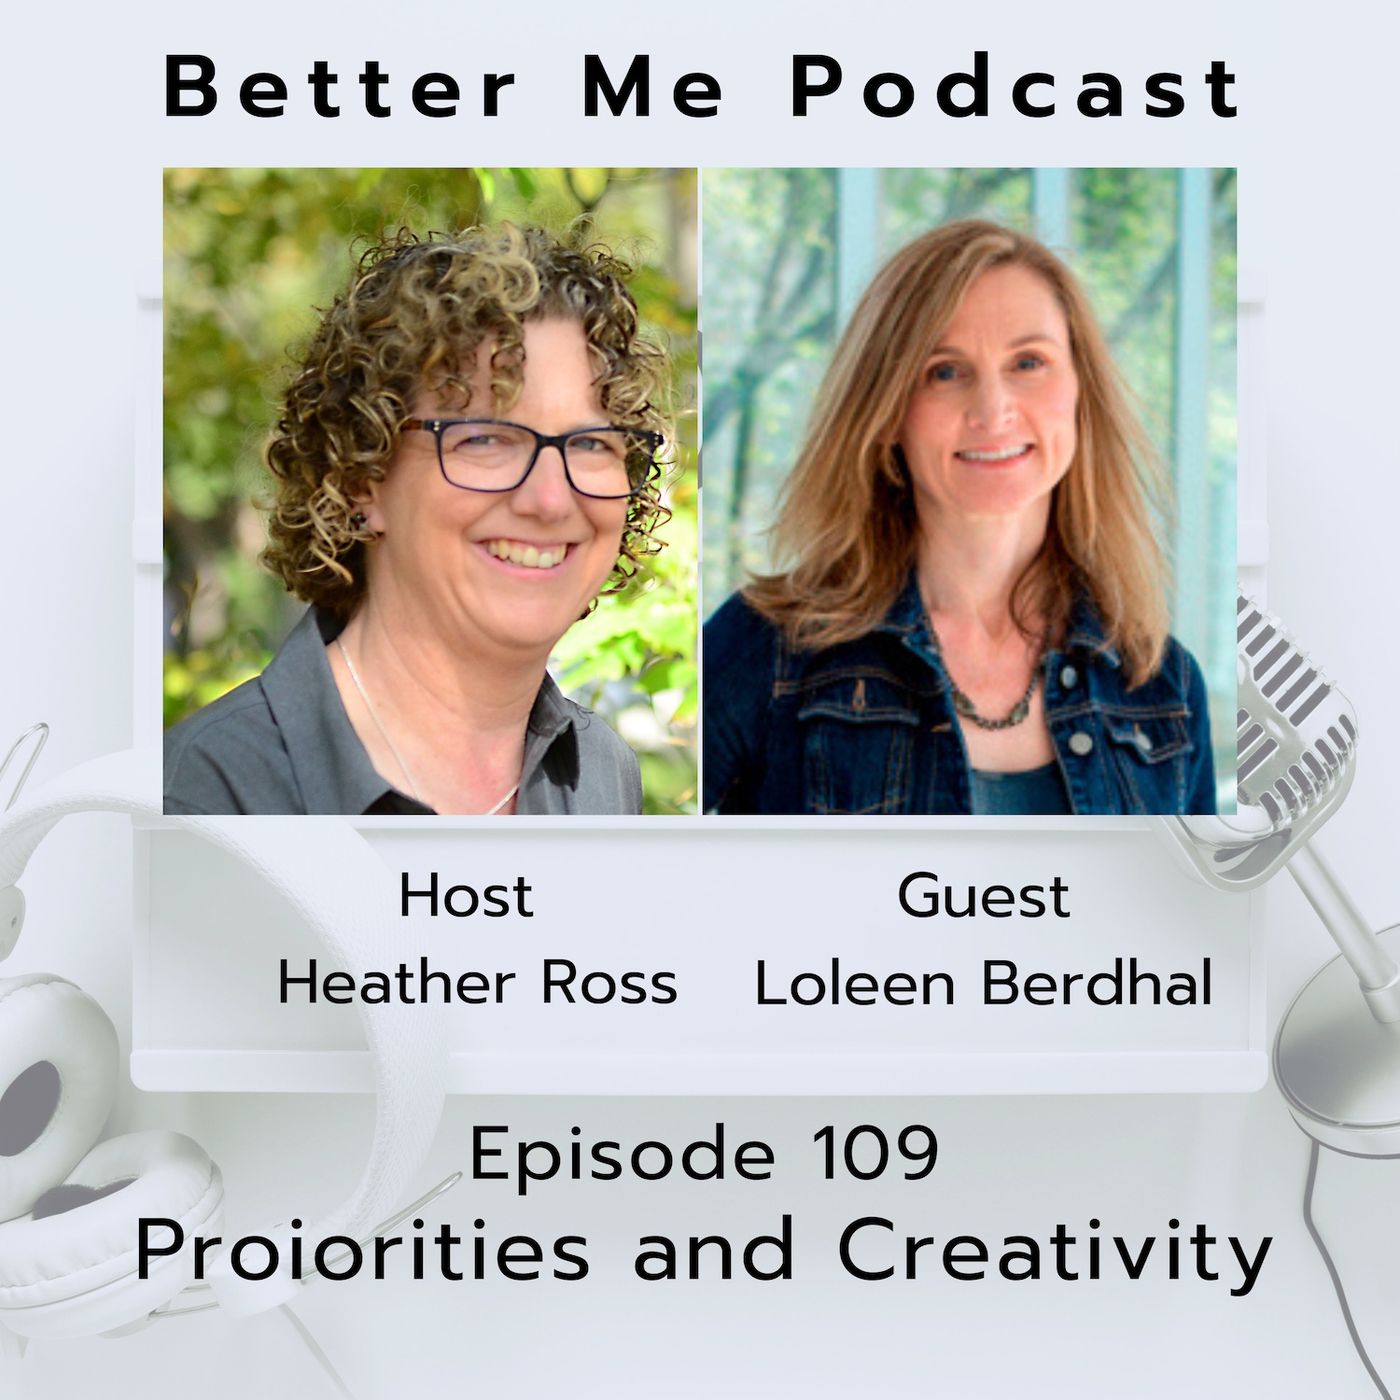 EP 109 Priorities and Creativity (with guest Loleen Berdahl)